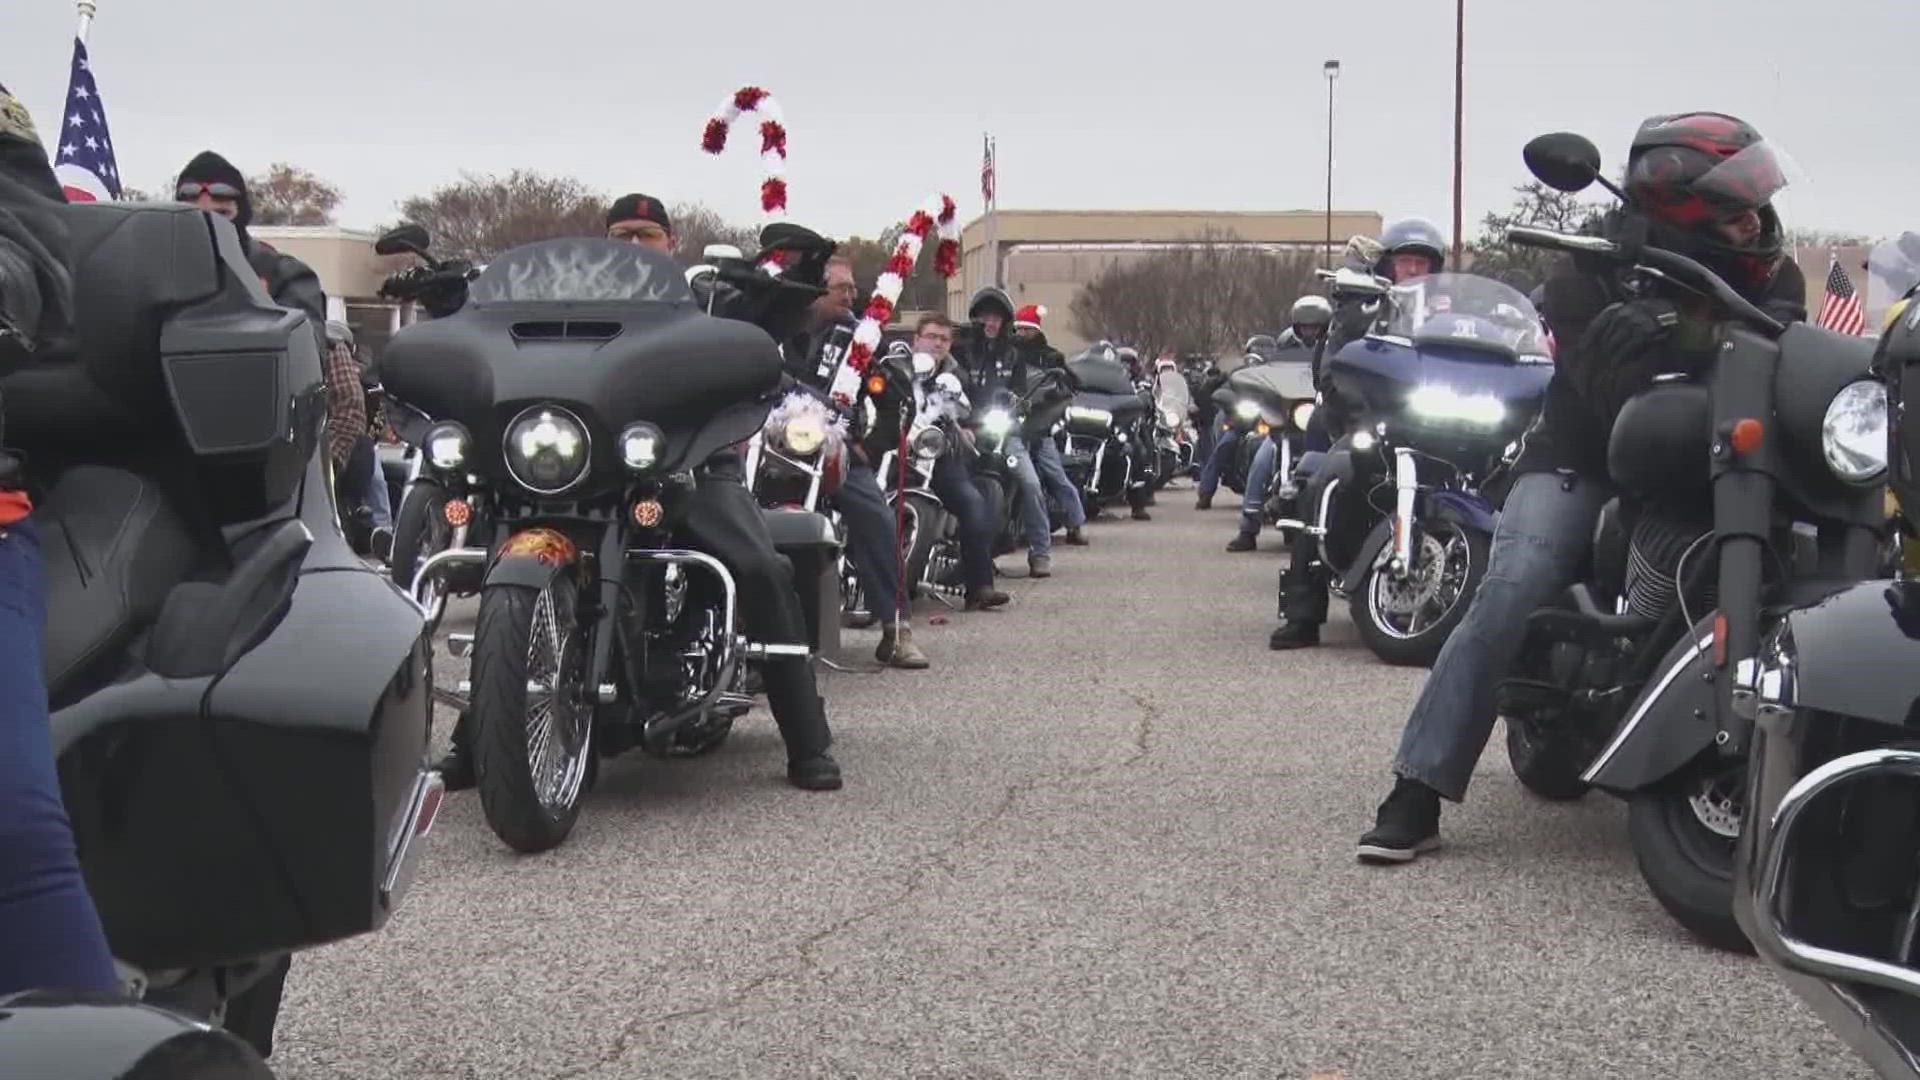 On Sunday, one community in Temple gathered to spread holiday cheer and ride for a greater cause at the 30th annual Tri-County Toy Run.